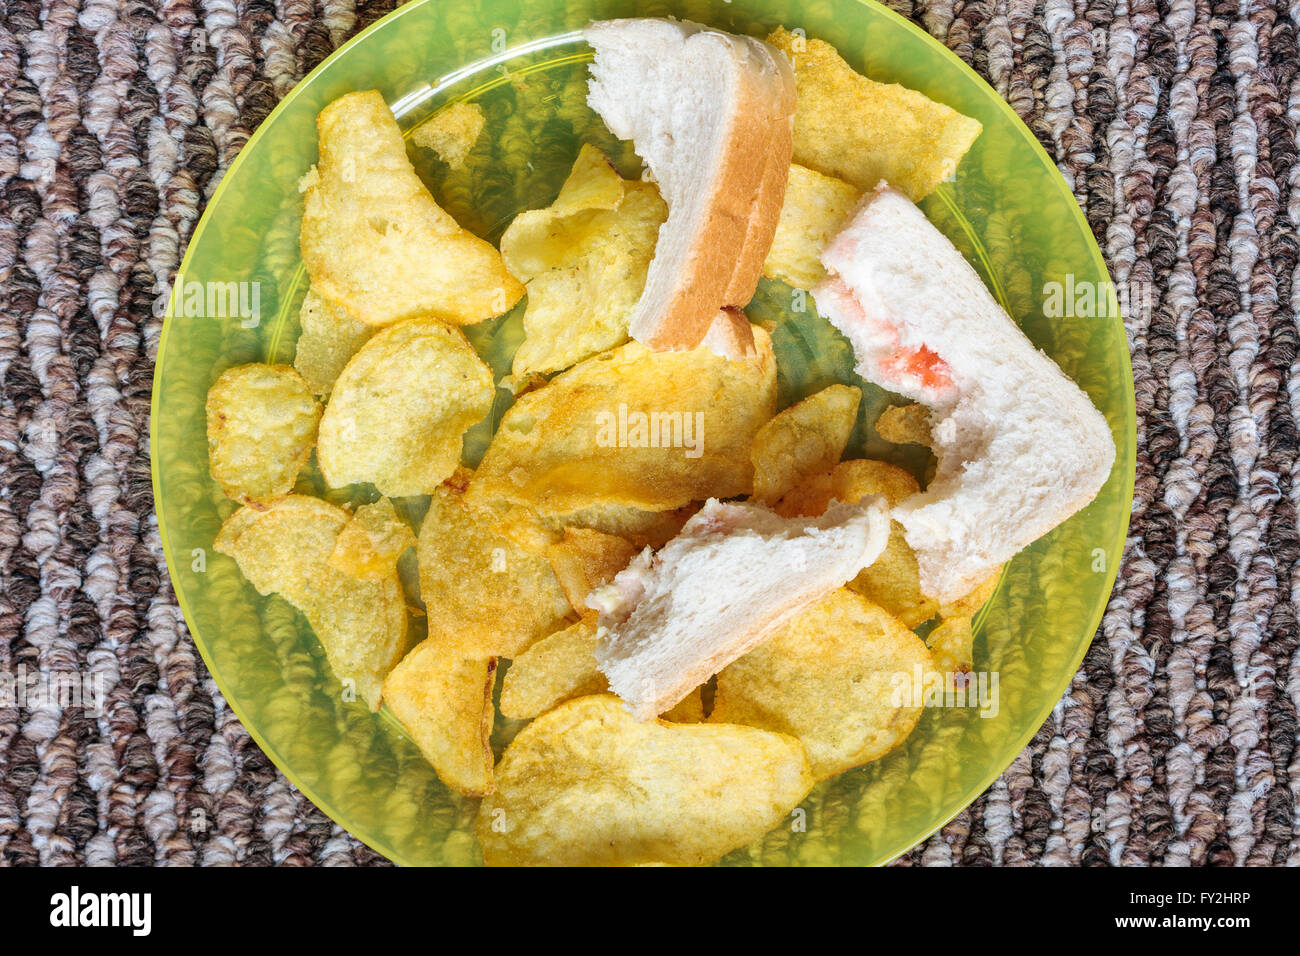 Crisps and crusts from a half eaten sandwich left over on a child's plastic plate Stock Photo